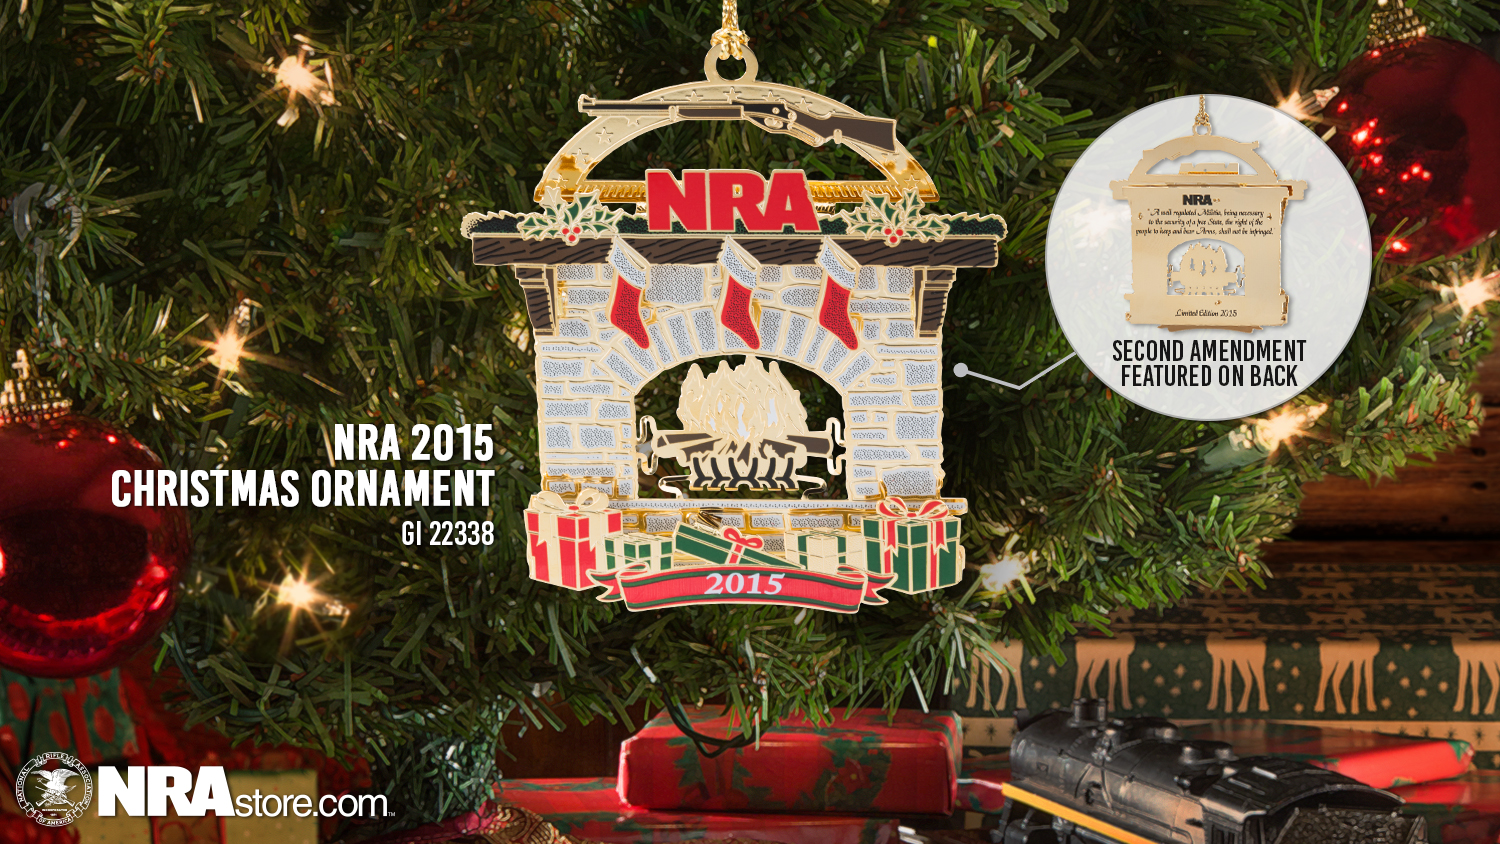 The 2015 NRA Christmas Ornament Is Here!